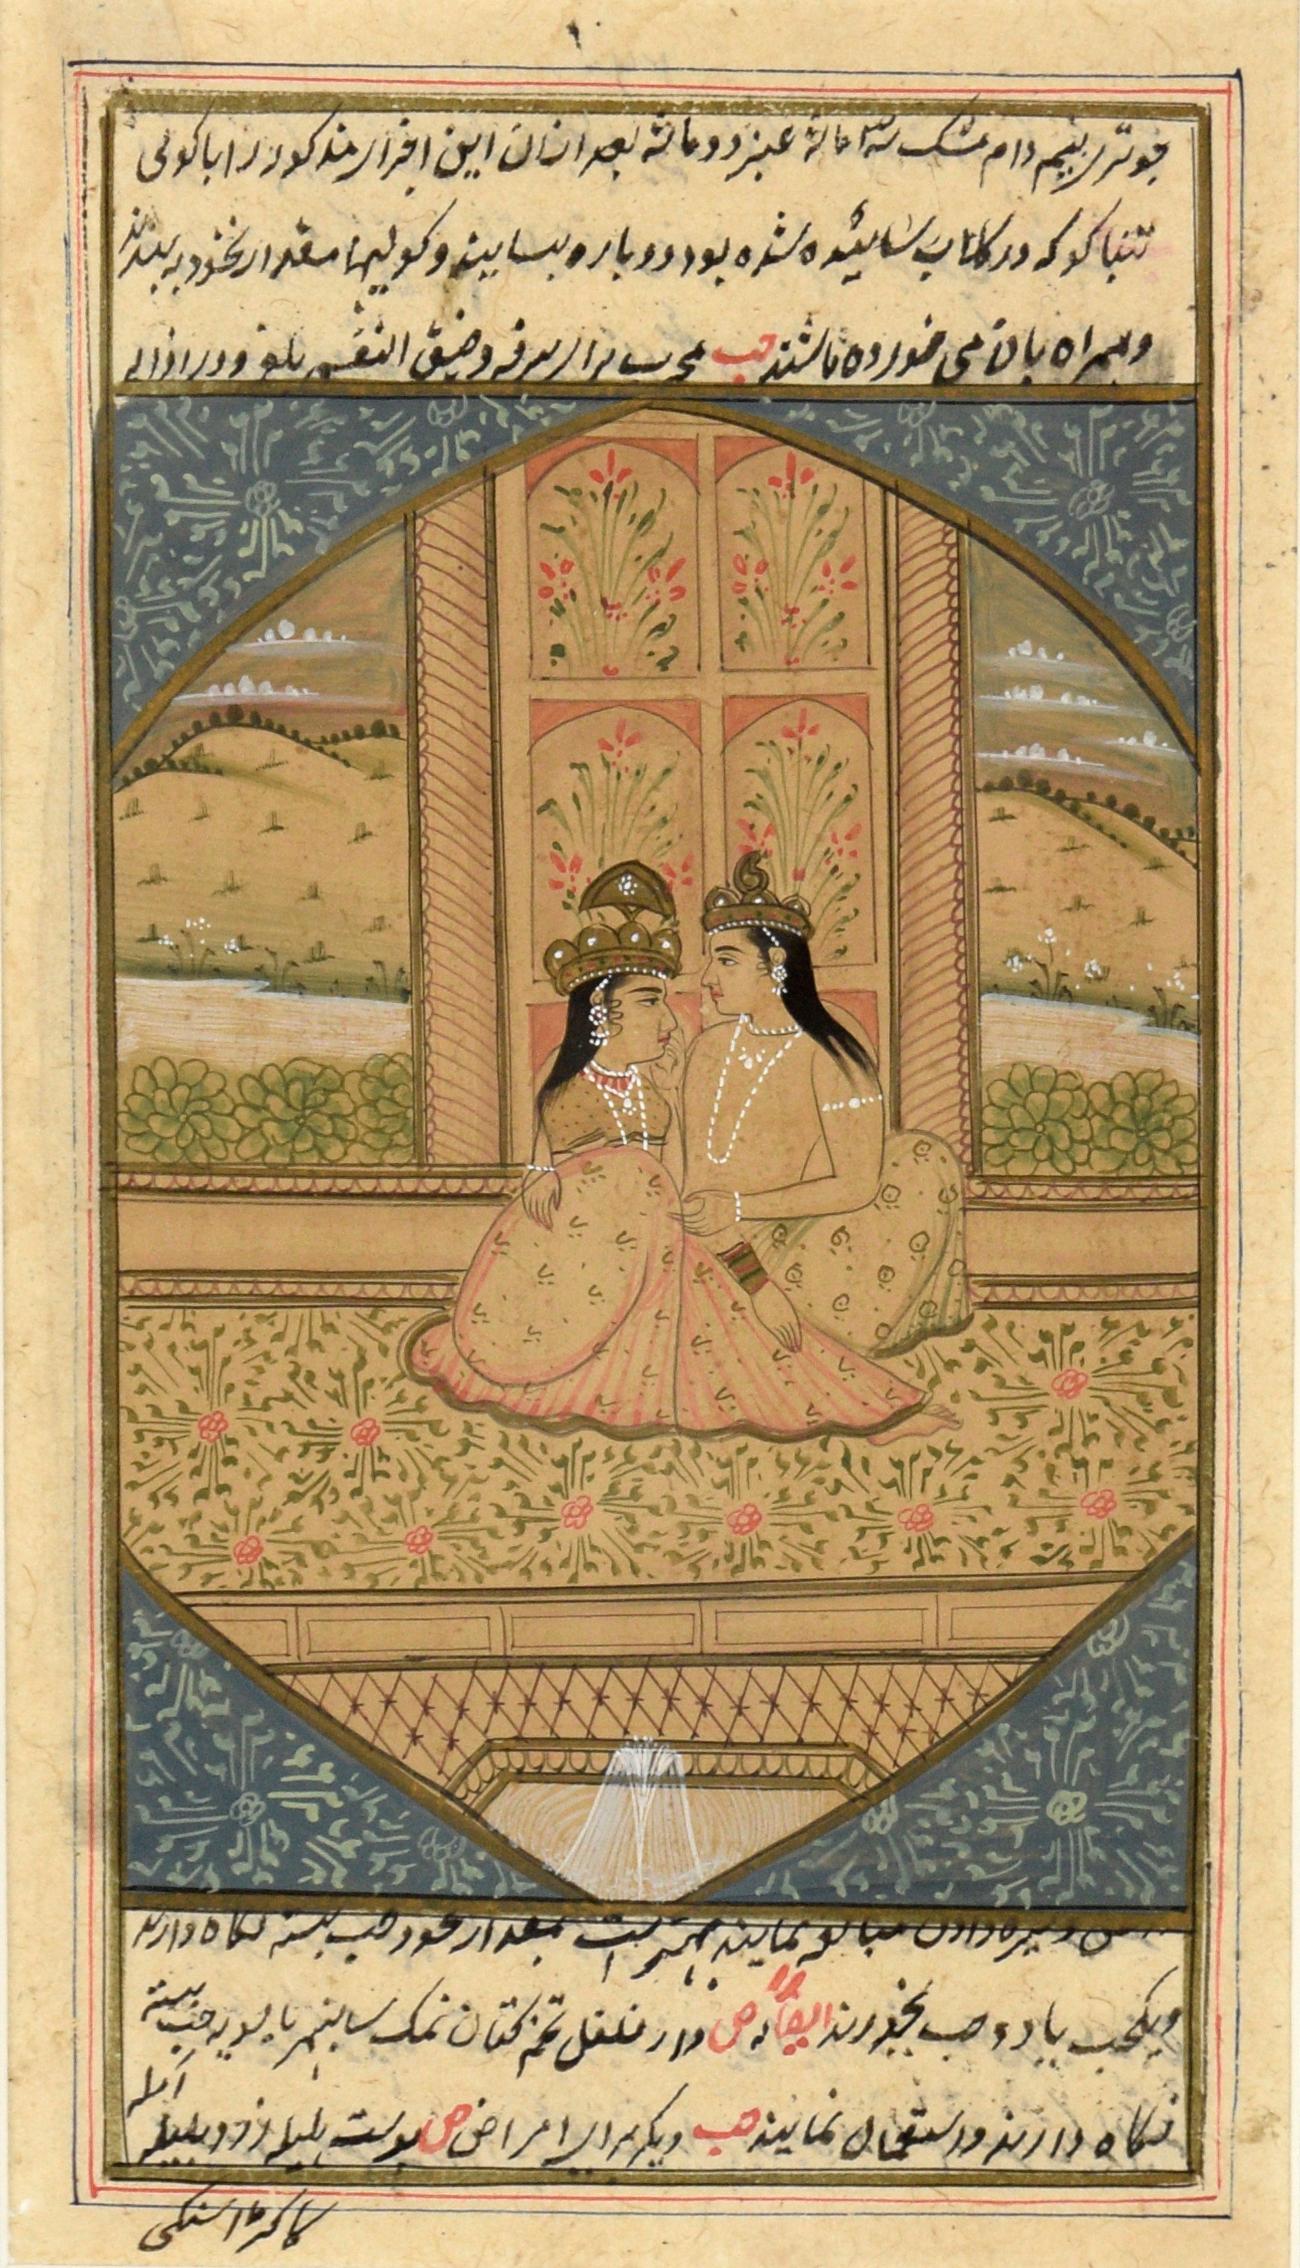 Highly detailed Persian or Mughal miniature painting from a Medical manuscript, curiously illustrated and depicting an court scene with two embracing figures possibly of the Mughal Dynasty. The people are seated on a rug with a floral pattern,